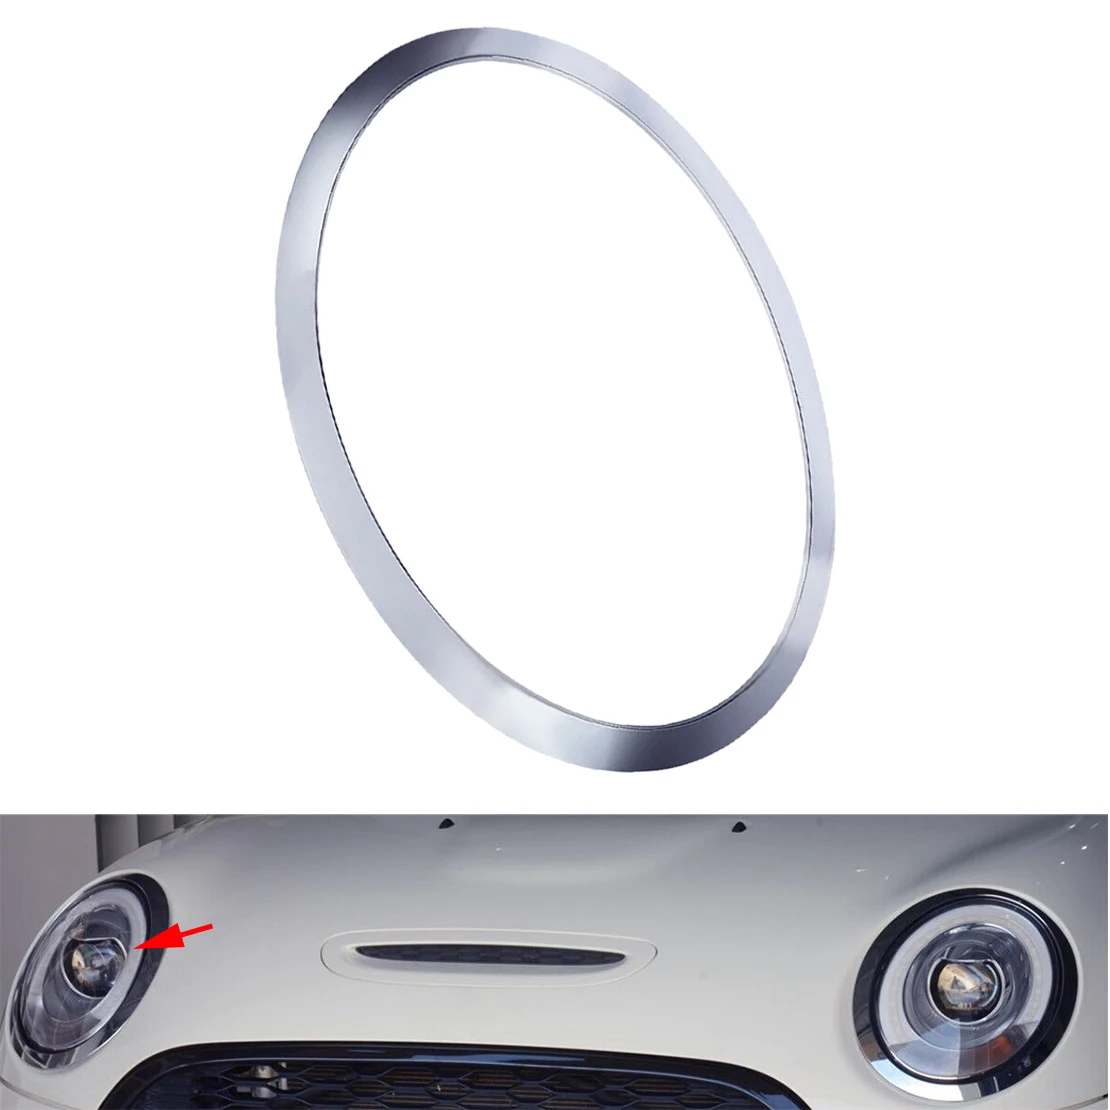 

ABS Car Front Right Headlight Bezel Cover Ring Trim Silver Fit for Mini Cooper F55 F56 F57 Gen3 51137300632